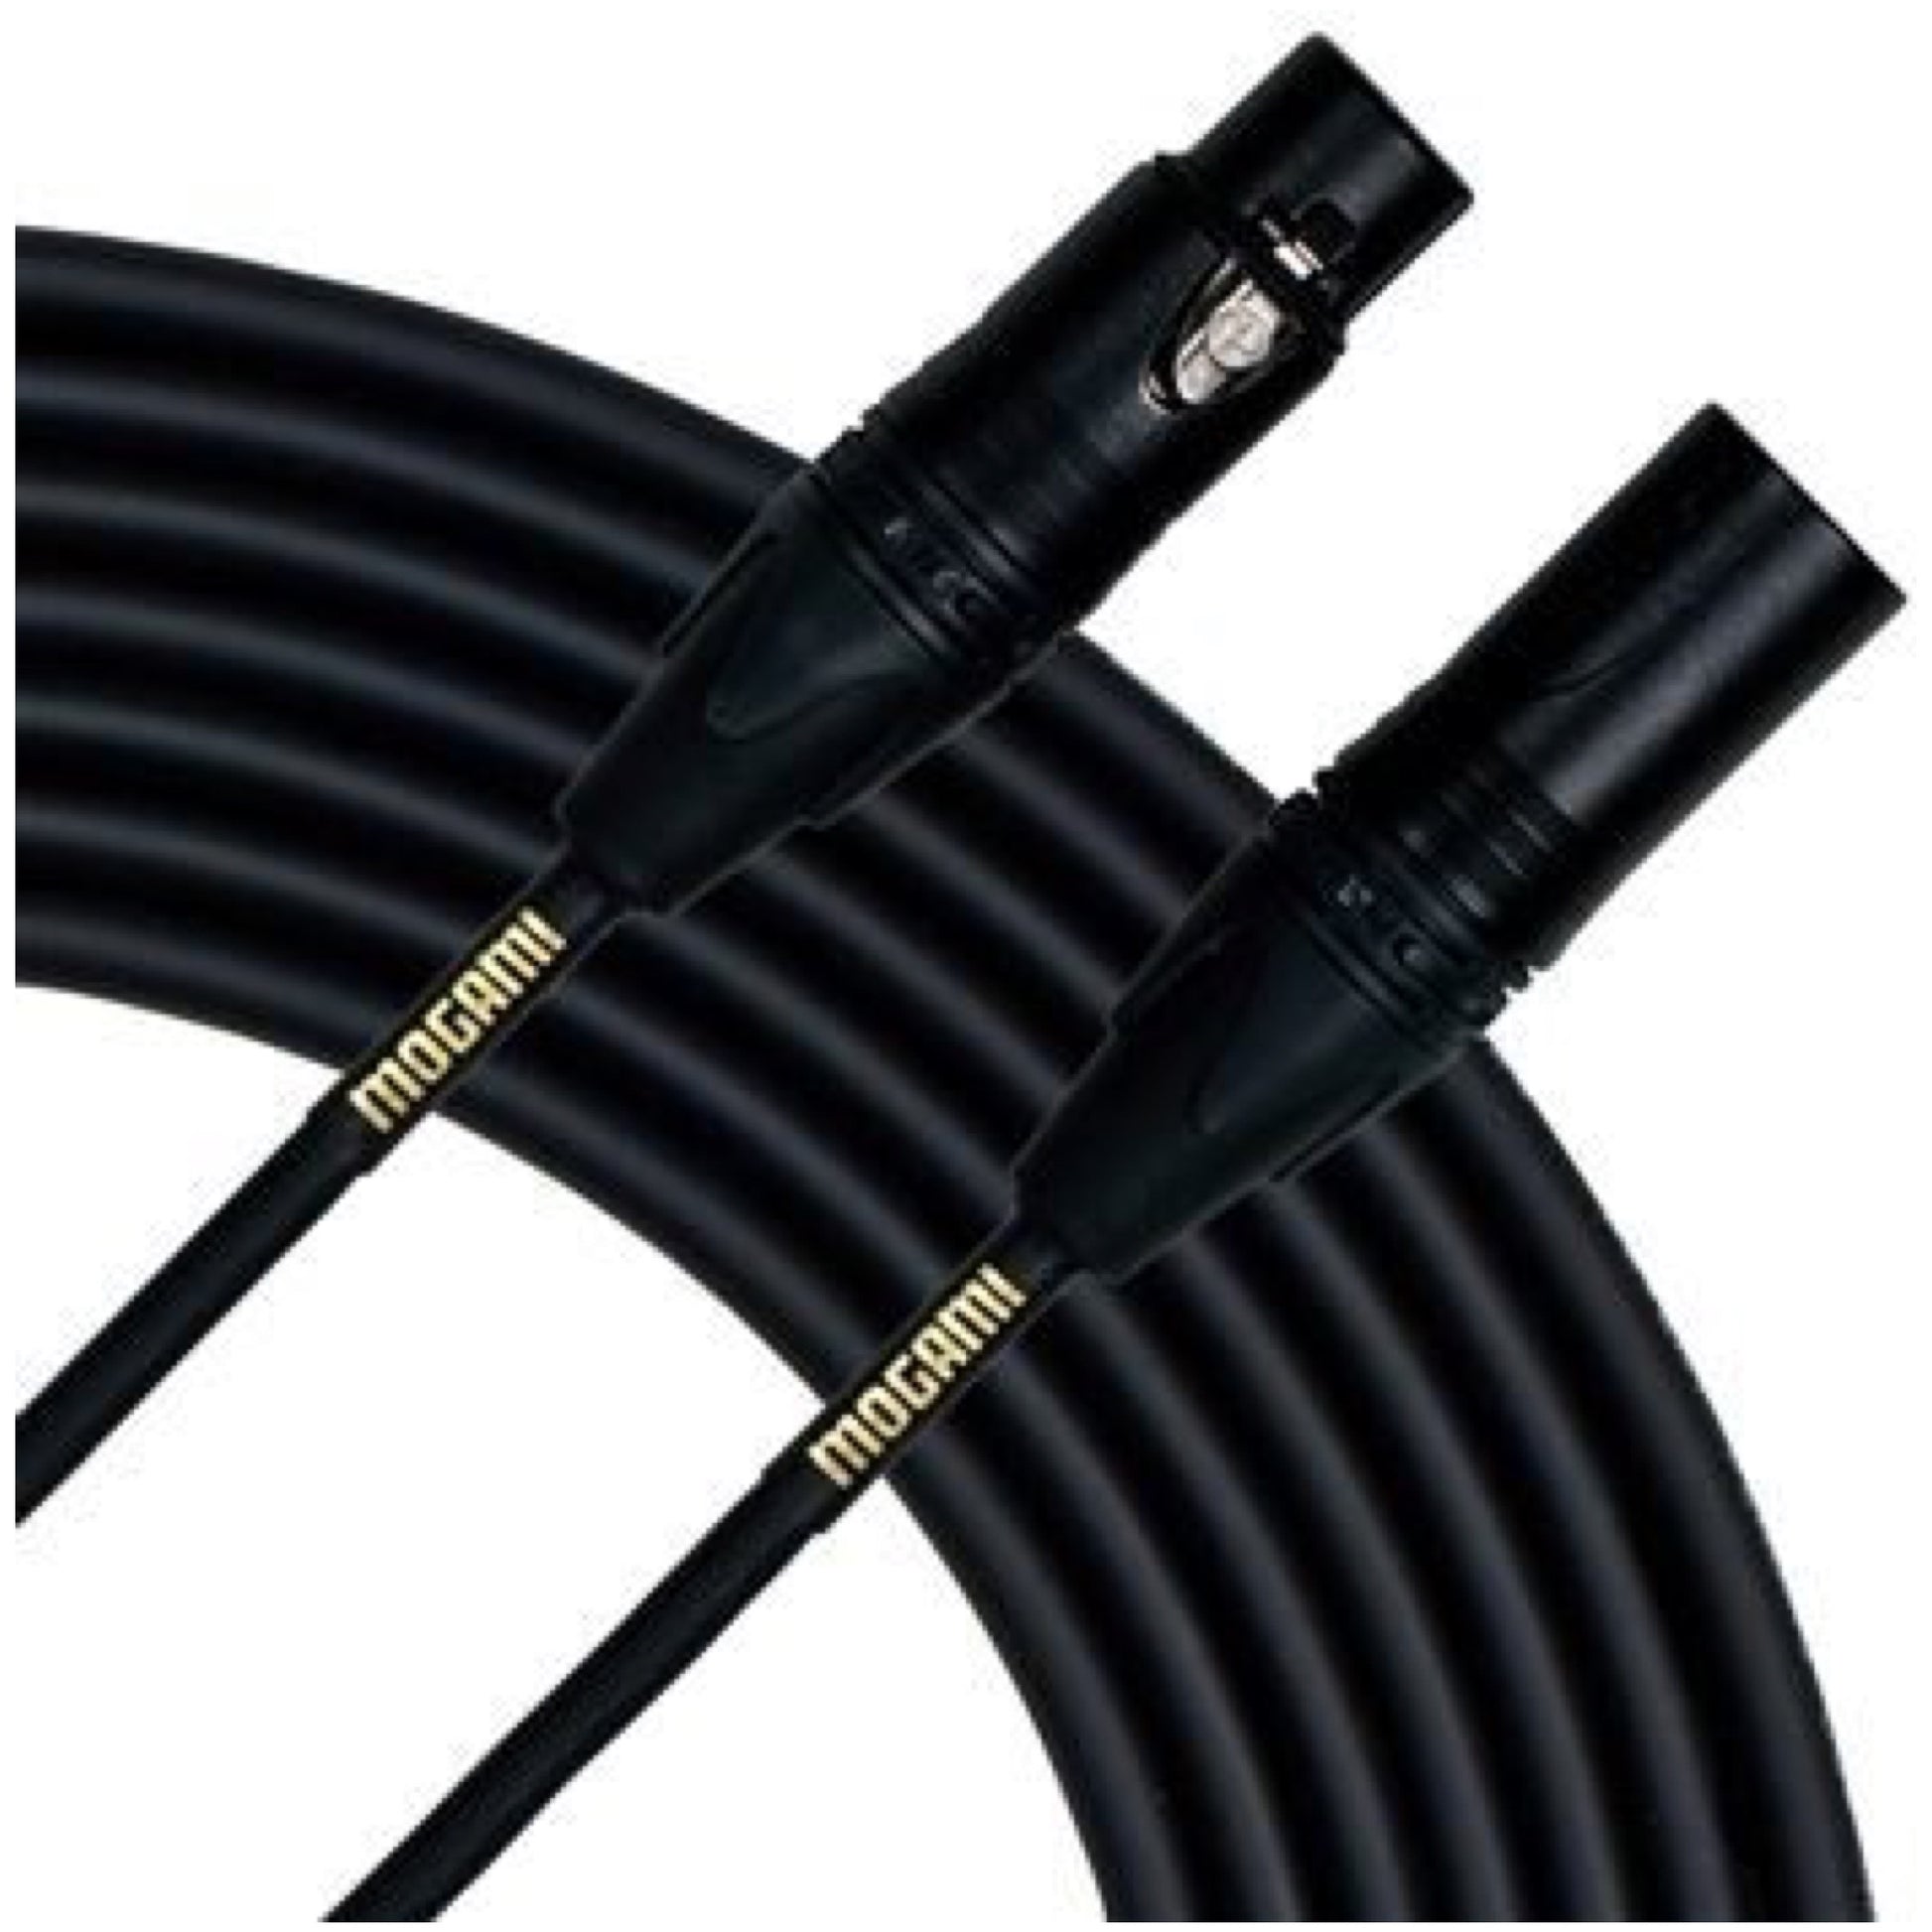 Mogami Gold Studio Microphone Cable, 100 Foot